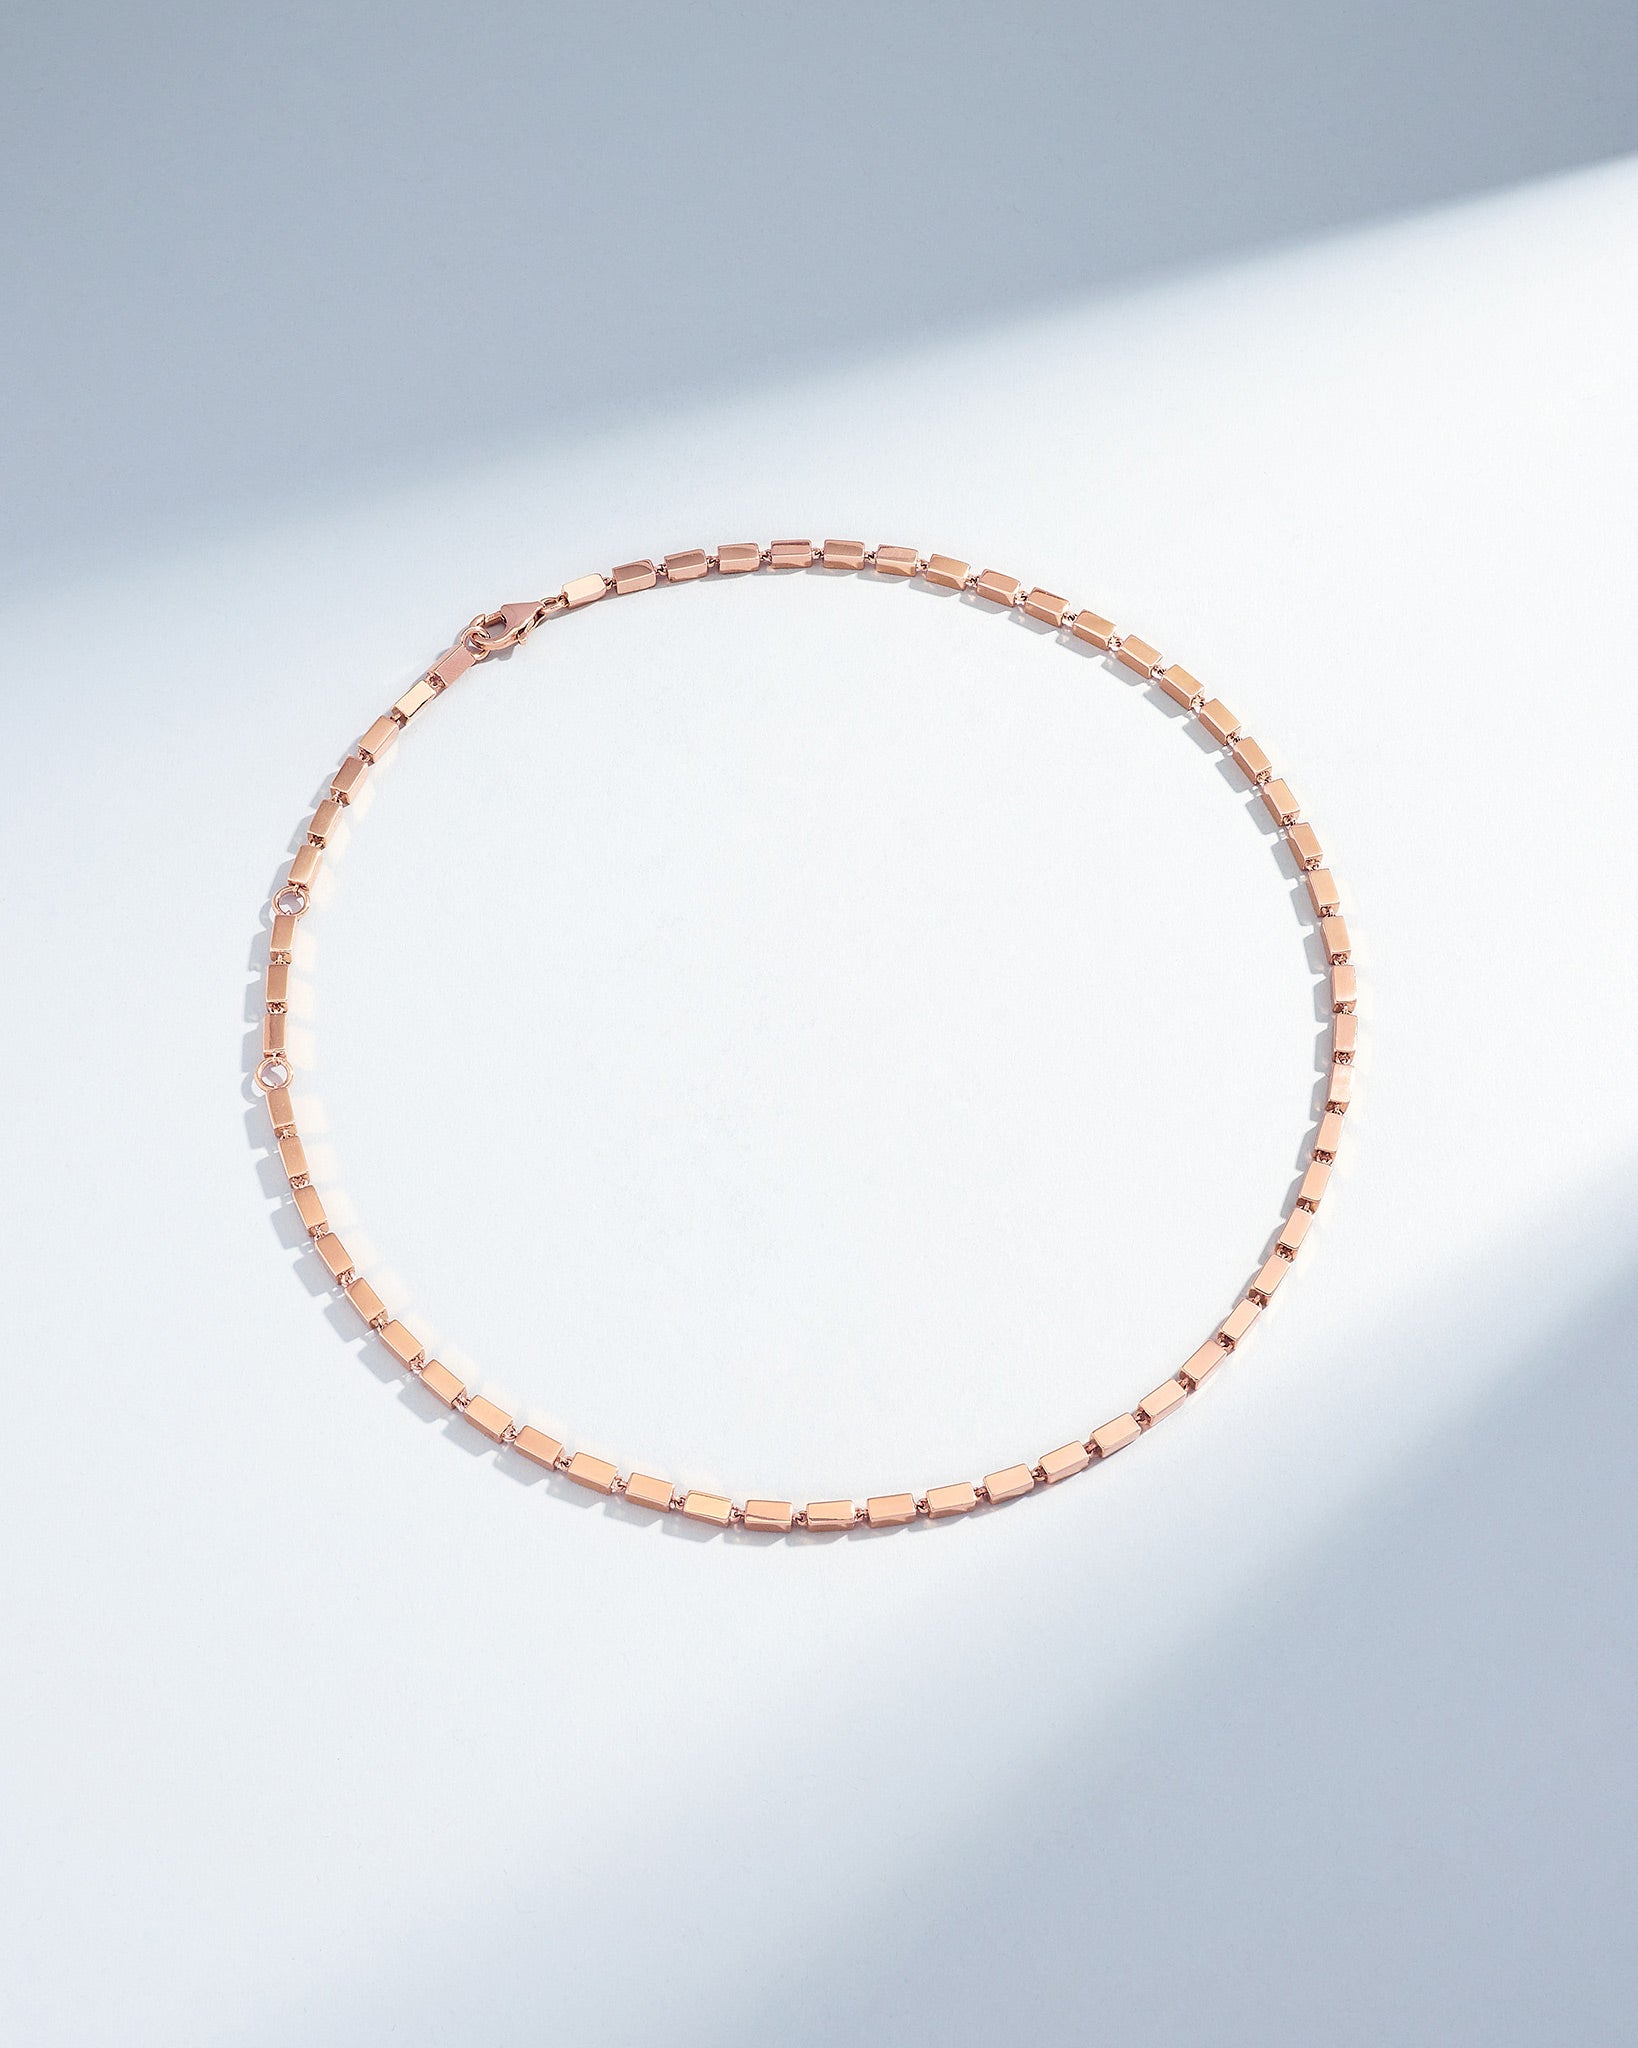 Suzanne Kalan Block-Chain Thick Necklace in 18k rose gold